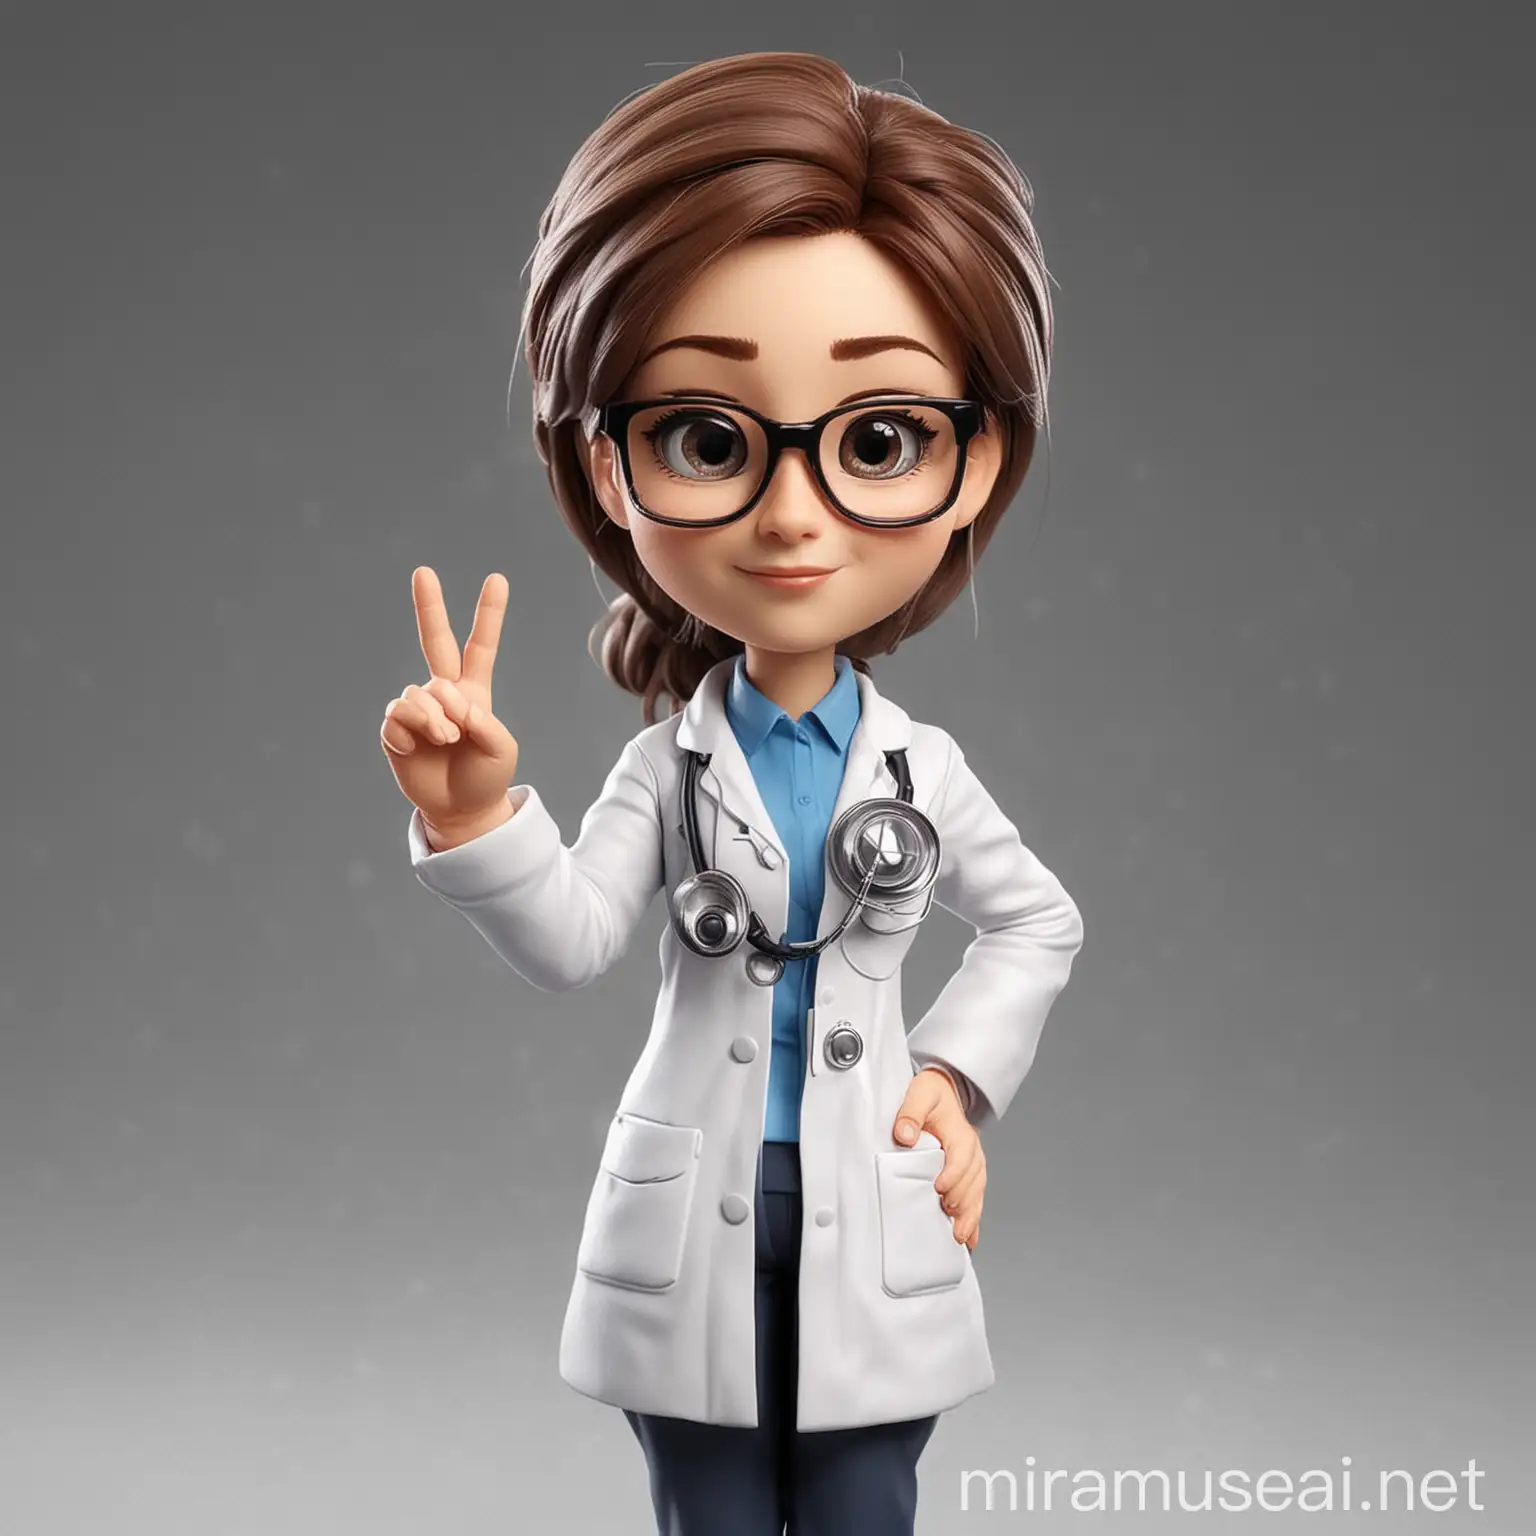 Confident Female Doctor Mascot for Gynecology and Medical Clinic Services